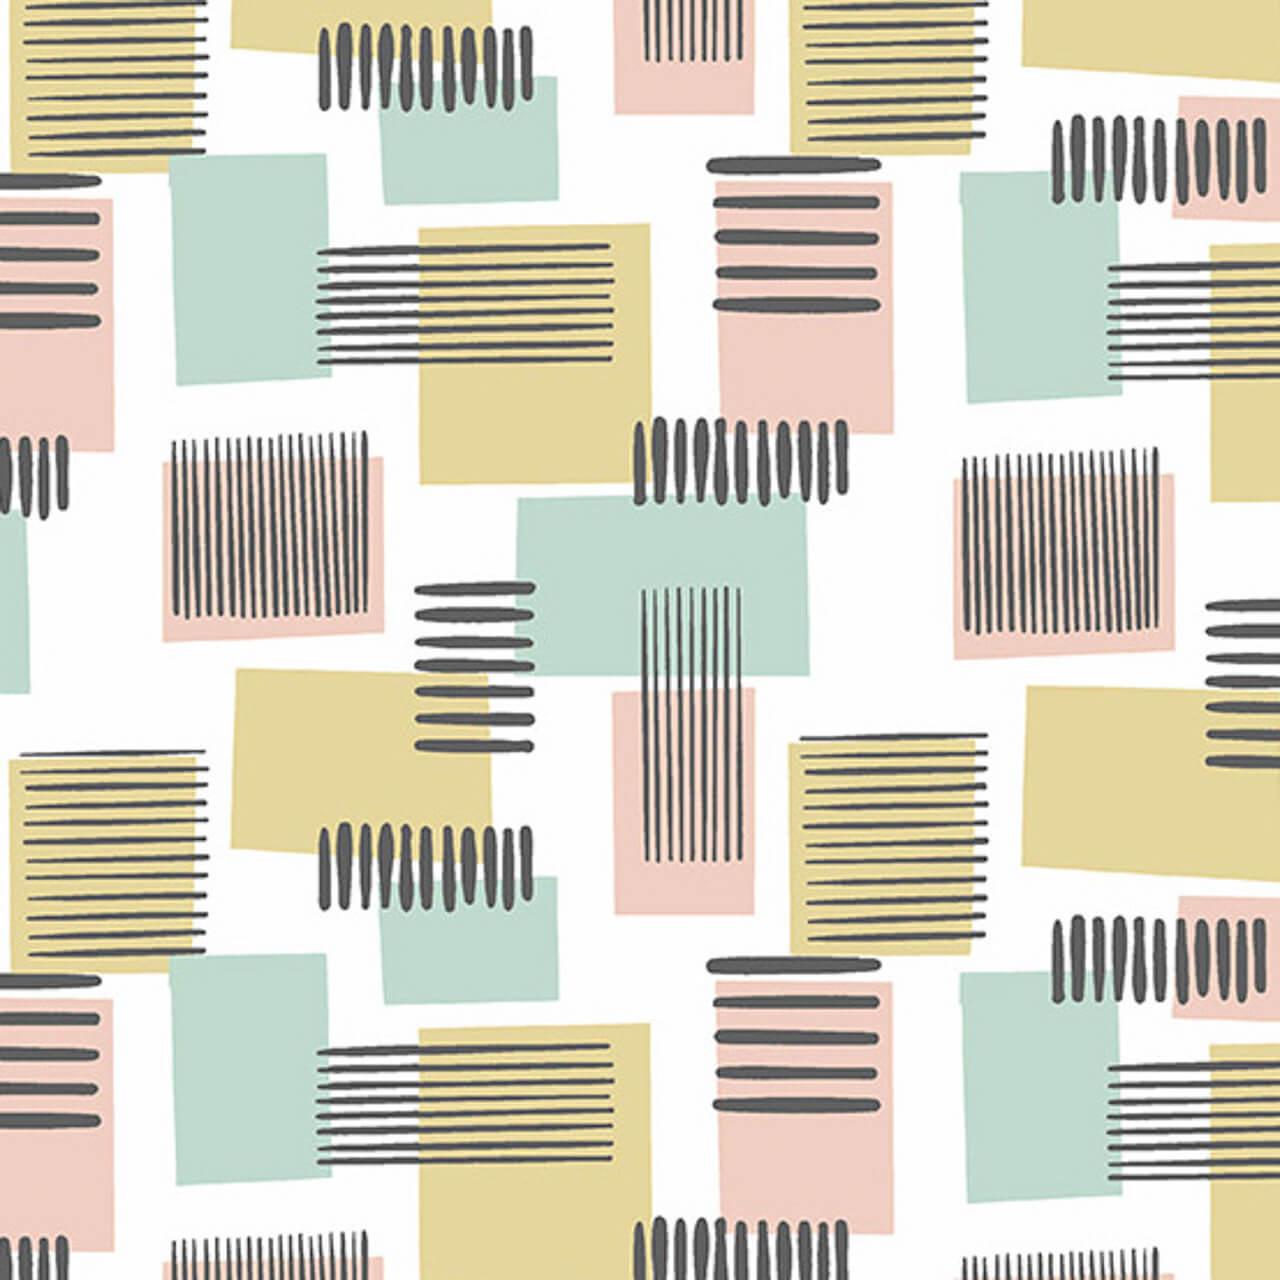 Libs Elliott's Sea Glass Metro Fabric - features various rectangles in turquoise, pale yellow and shell pink, set against white background